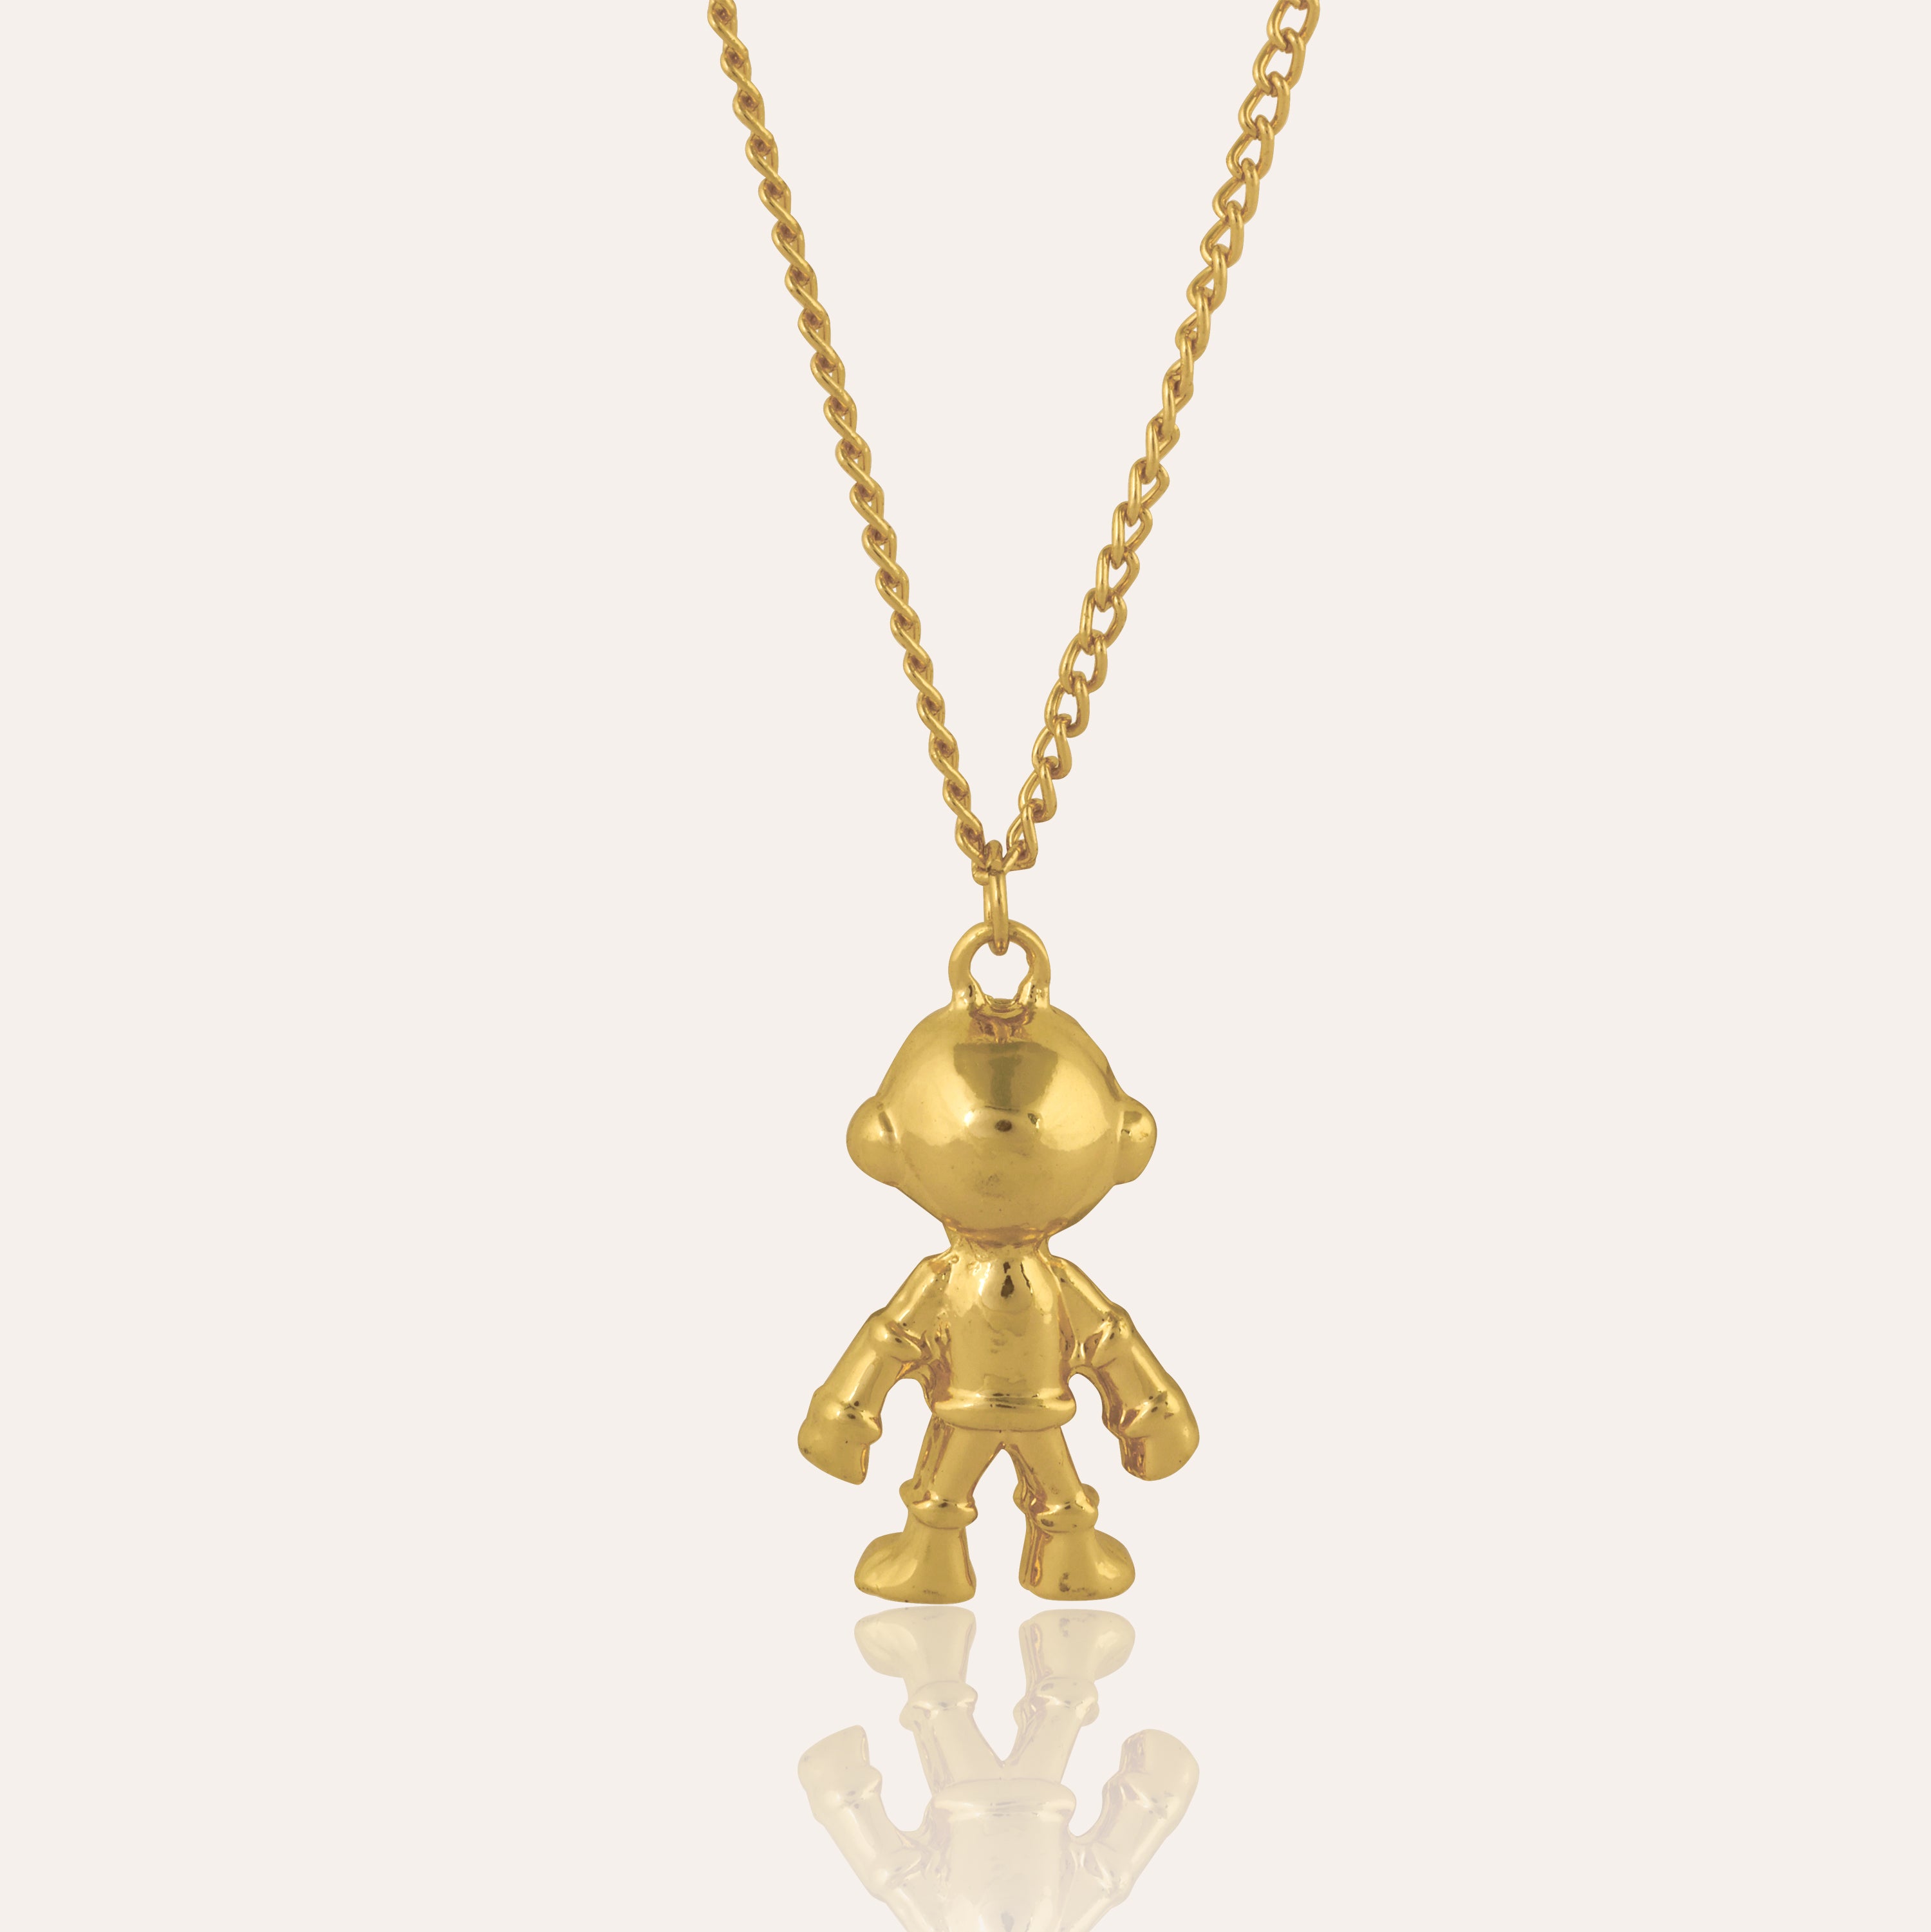 TFC Spaceman Gold Plated Pendant Necklace-Enhance your elegance with our collection of gold-plated necklaces for women. Choose from stunning pendant necklaces, chic choker necklaces, and trendy layered necklaces. Our sleek and dainty designs are both affordable and anti-tarnish, ensuring lasting beauty. Enjoy the cheapest fashion jewellery, lightweight and stylish- only at The Fun Company